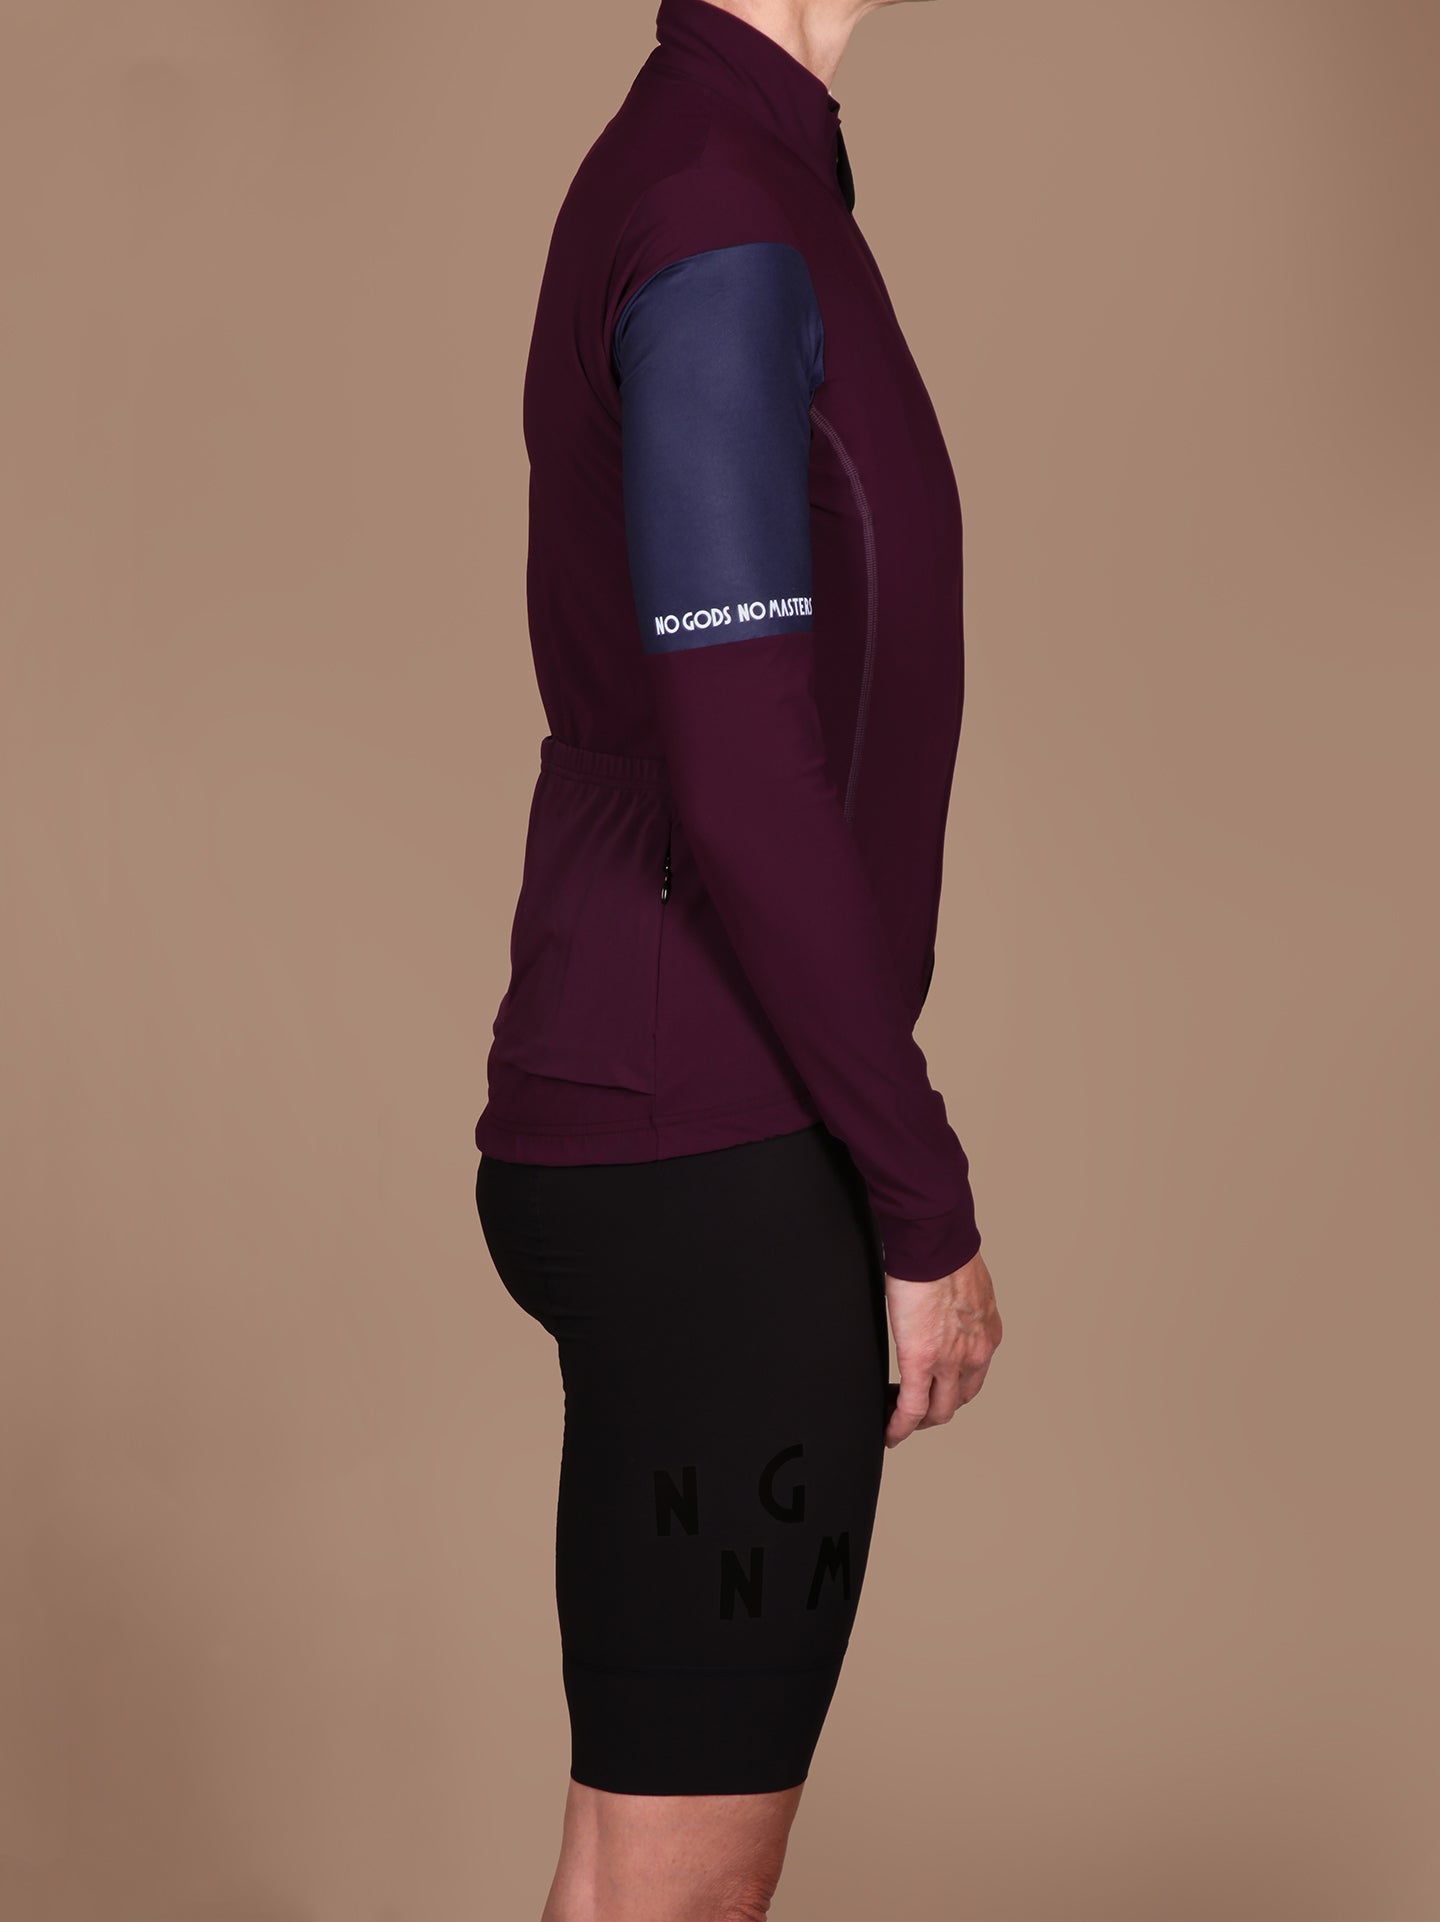 NGNM Performance Long Sleeve Jersey